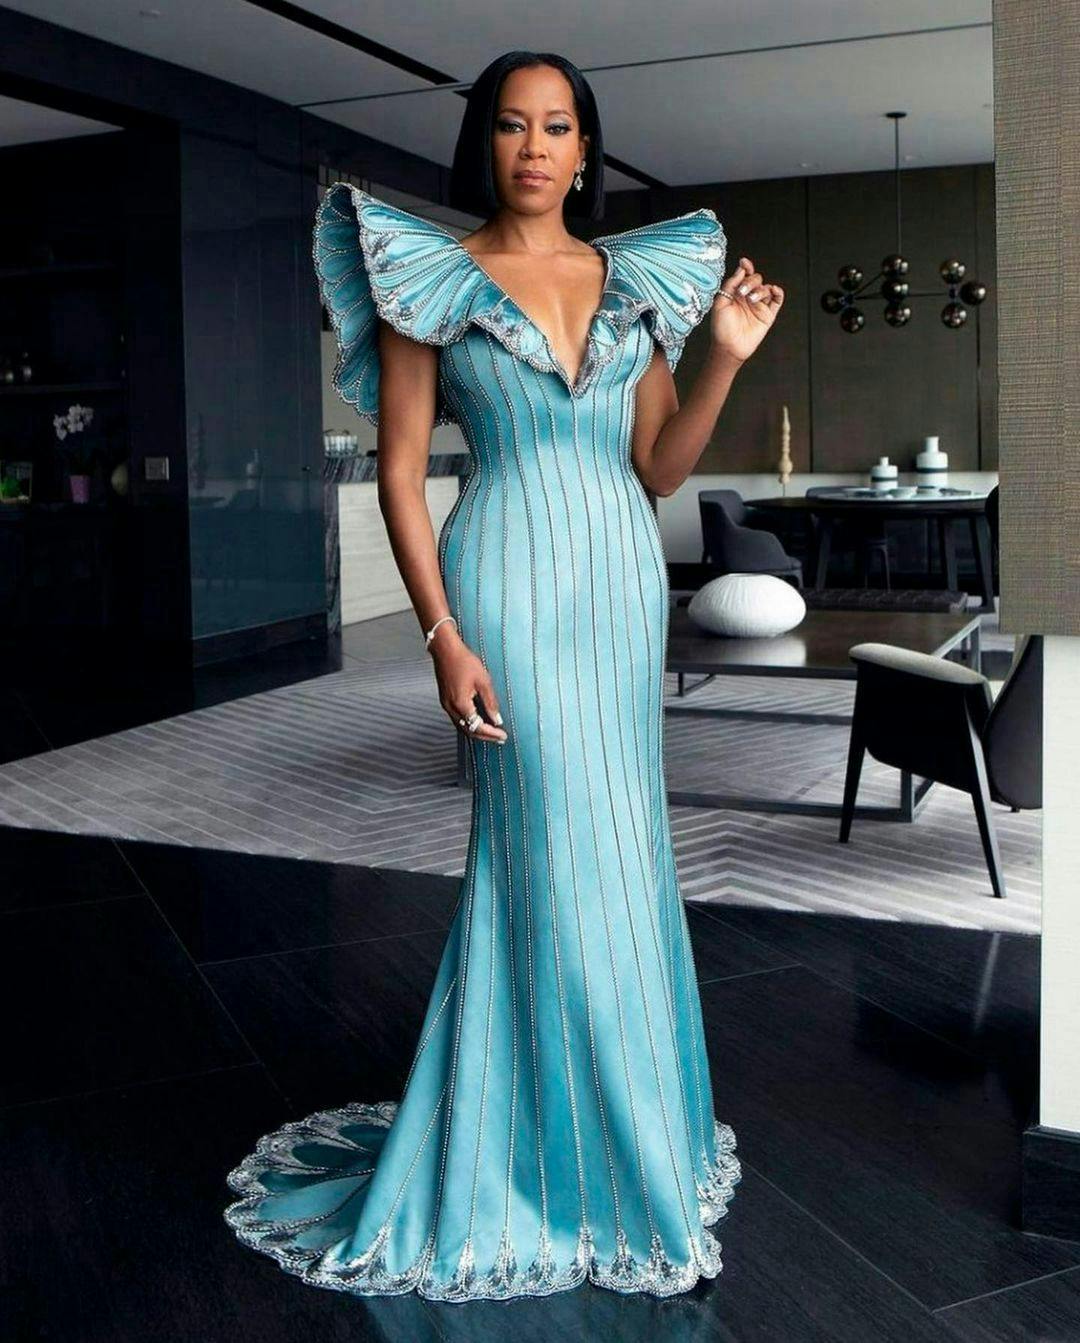 clothing evening dress gown robe fashion female person chair woman wedding gown